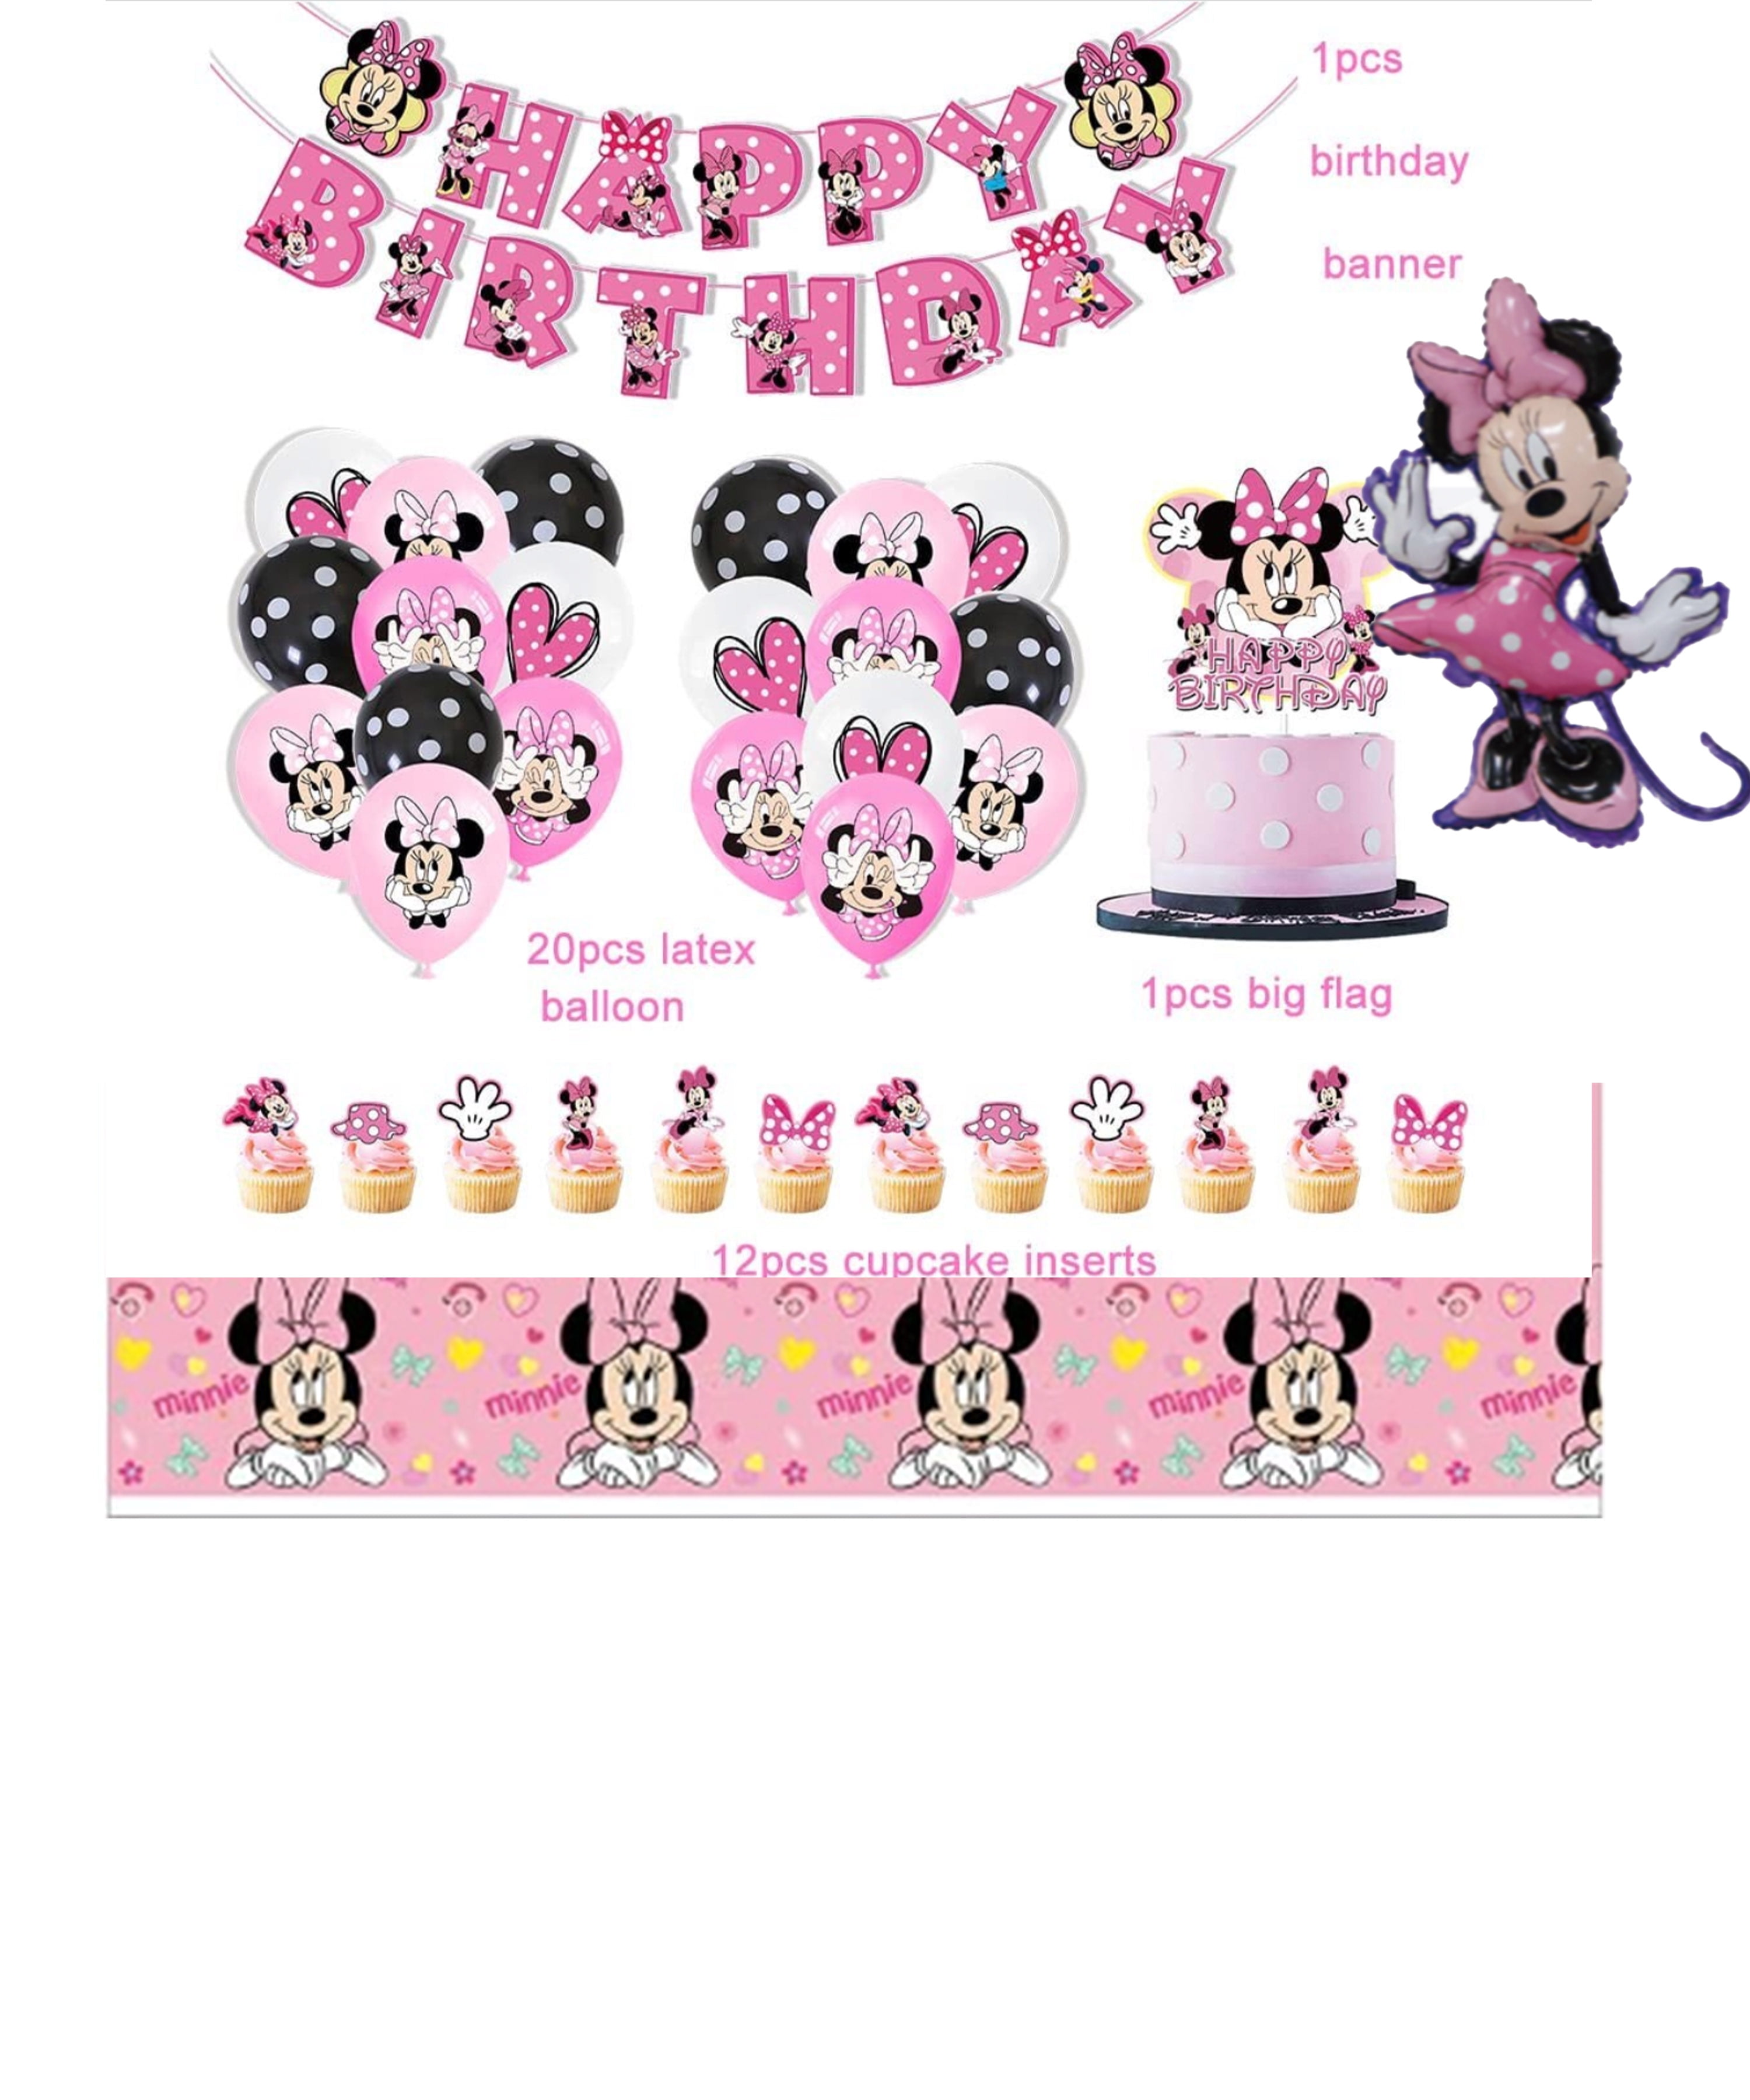 Baby Minnie Mouse Birthday Party Supplies Minnie Mouse Decorations for  Girls Party Supplies Plate Cake Balloon